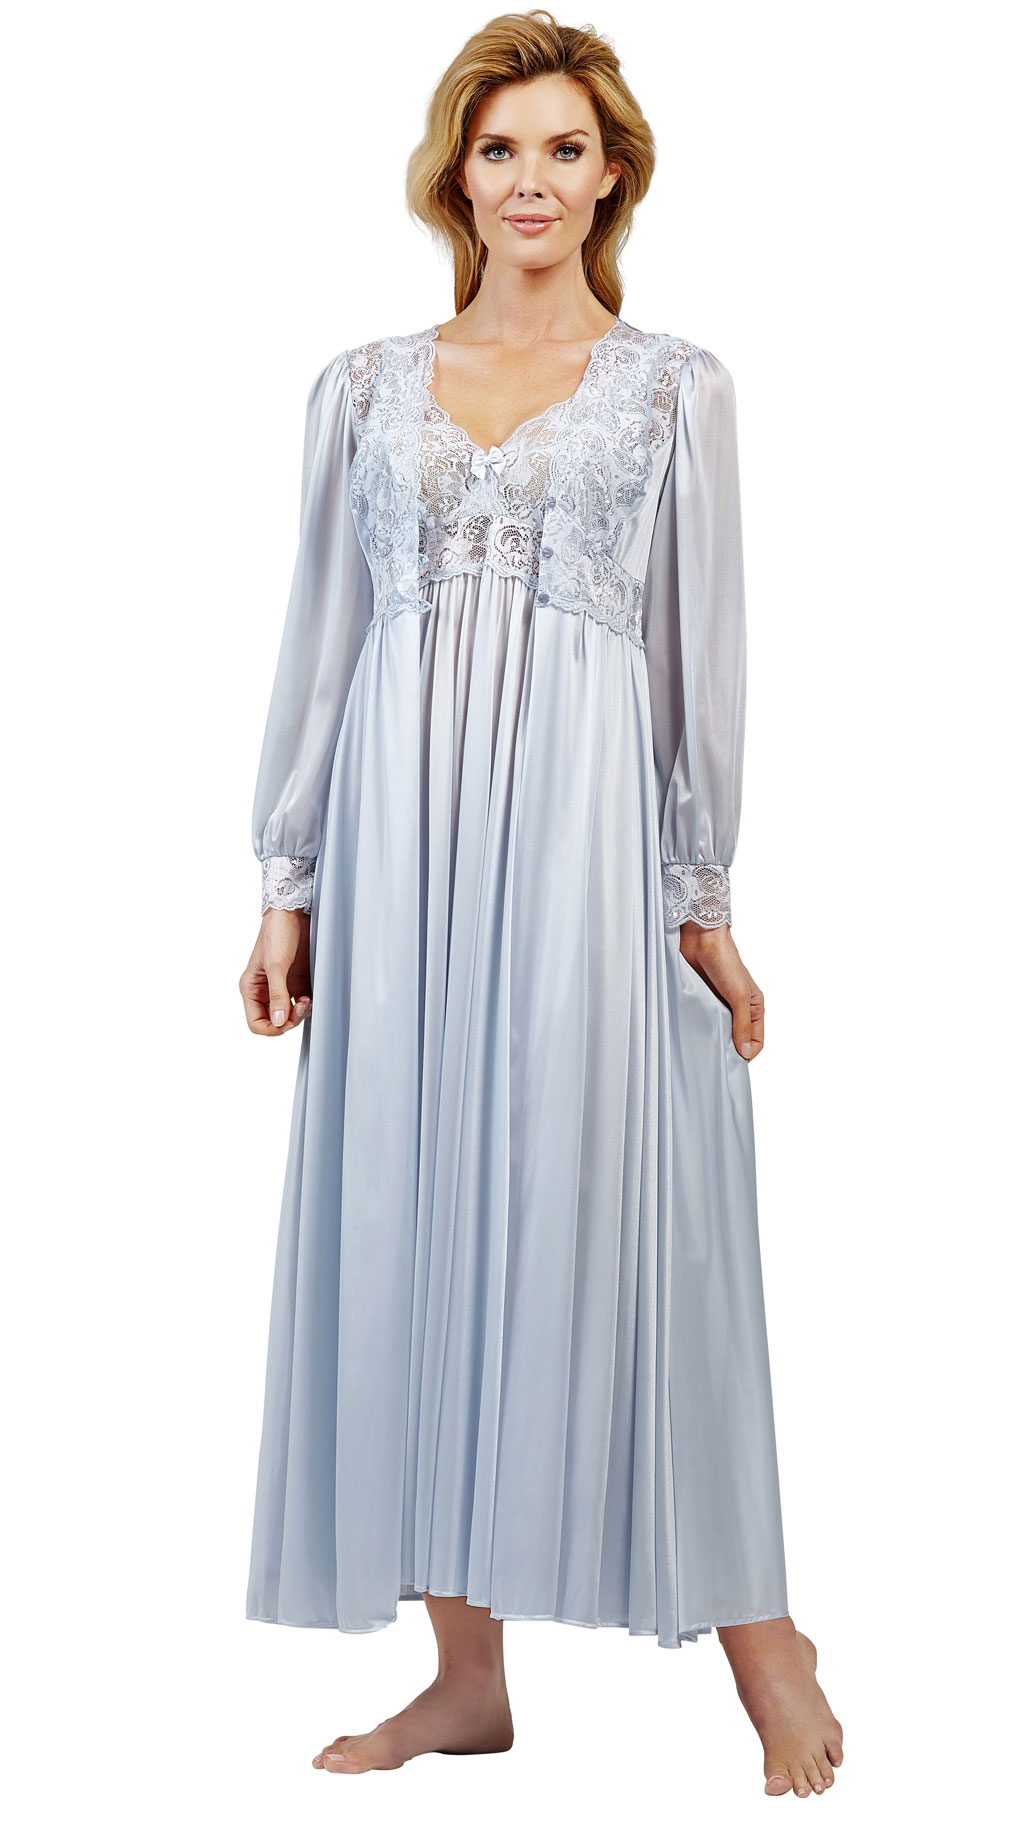 full length nightgown and robe set